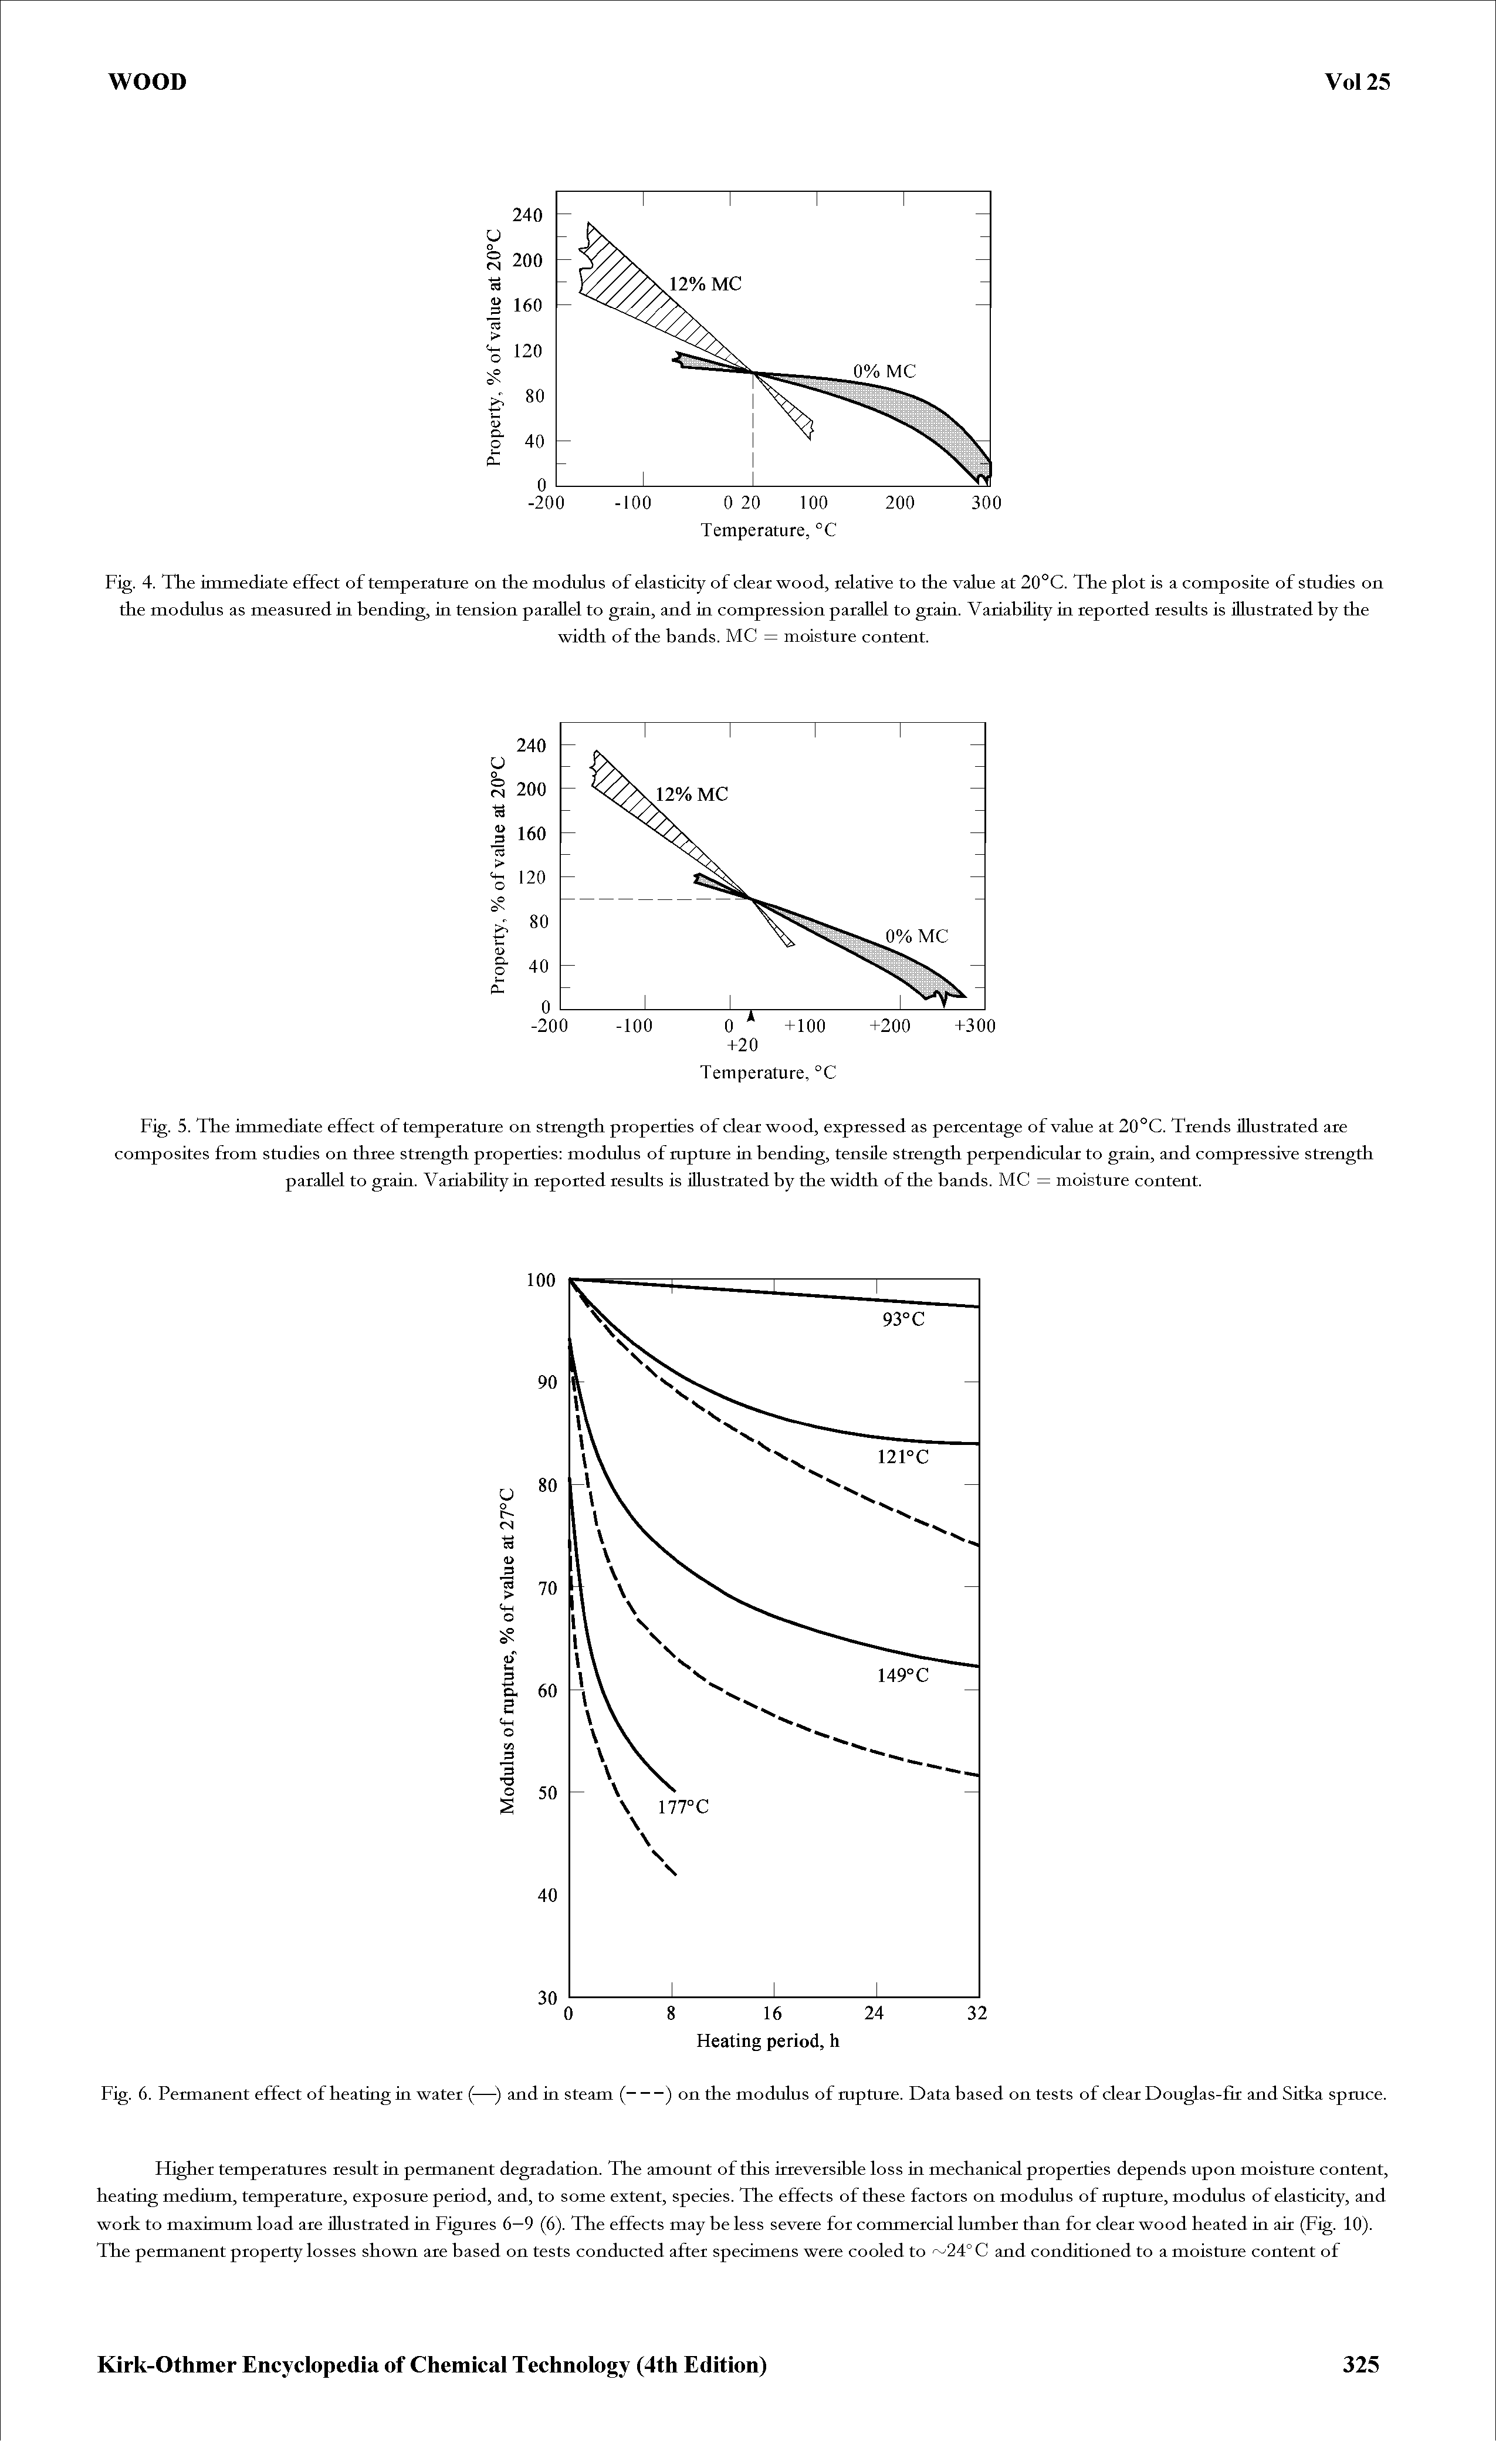 Fig. 5. The immediate effect of temperature on strength properties of clear wood, expressed as percentage of value at 20°C. Trends illustrated are composites from studies on three strength properties modulus of mpture in bending, tensile strength perpendicular to grain, and compressive strength parallel to grain. VariabiUty in reported results is illustrated by the width of the bands. MC = moisture content.